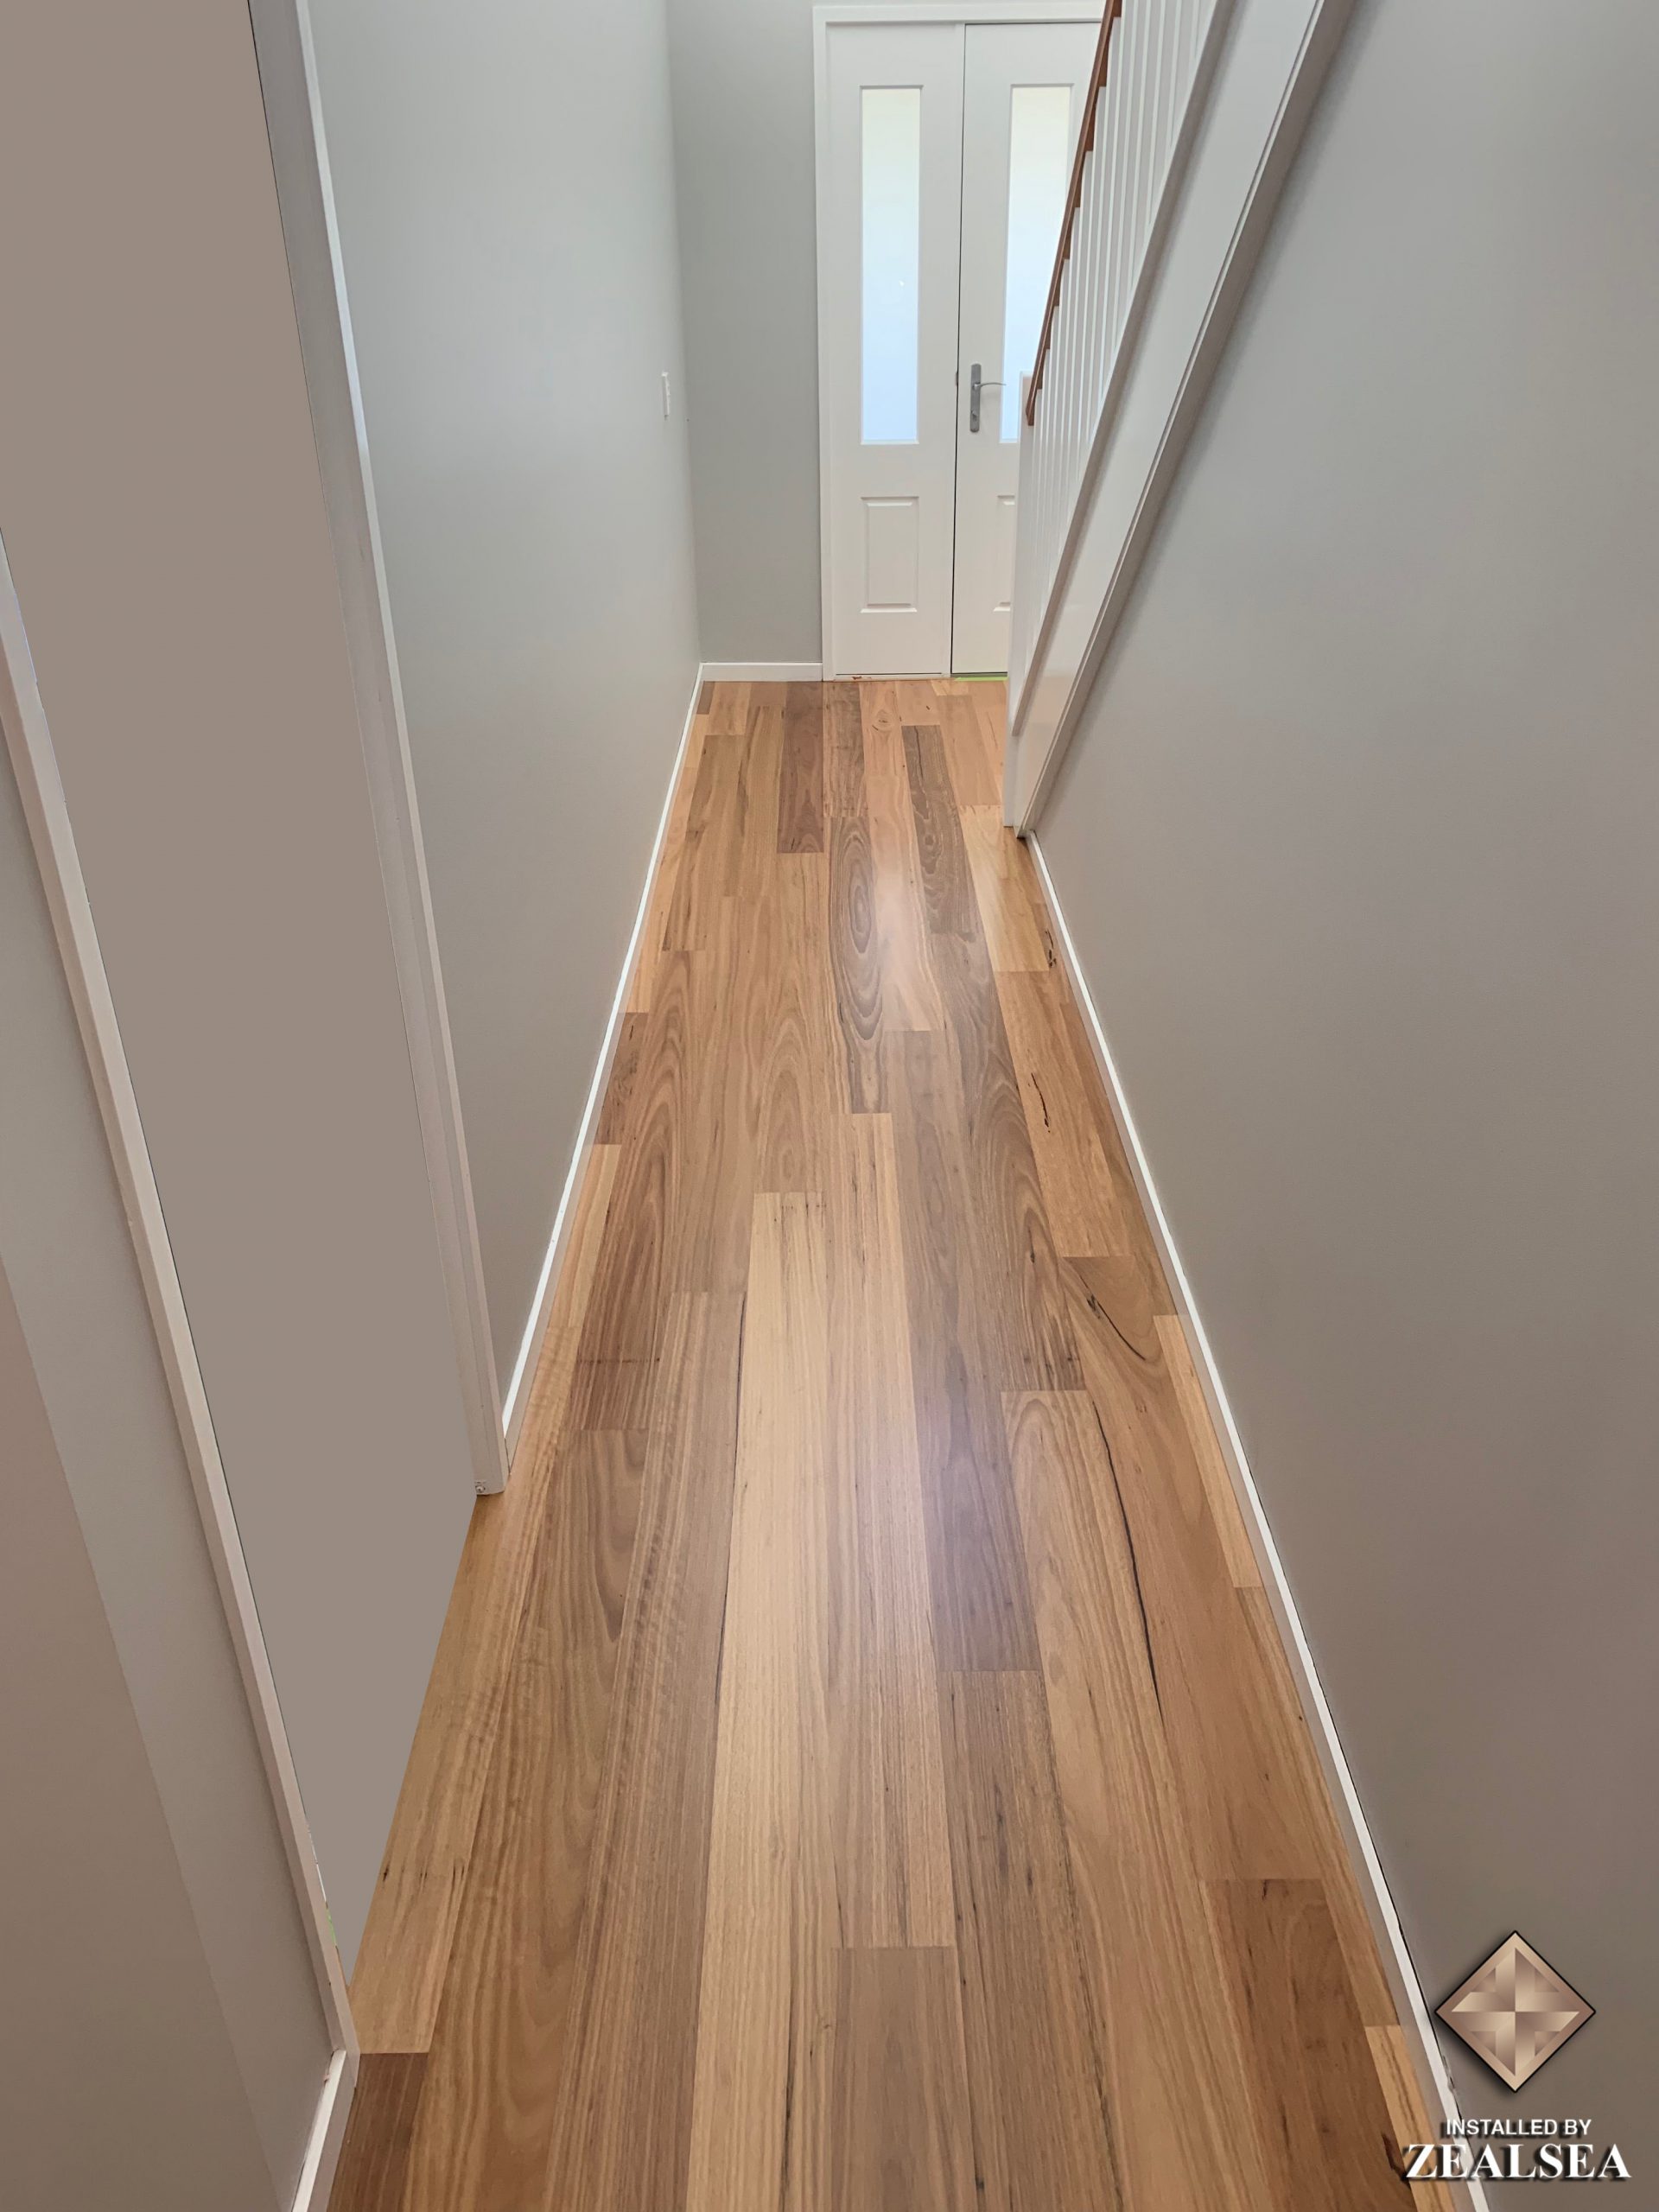 zealsea timber flooring professional installation oxley boral blackbutt 6 scaled